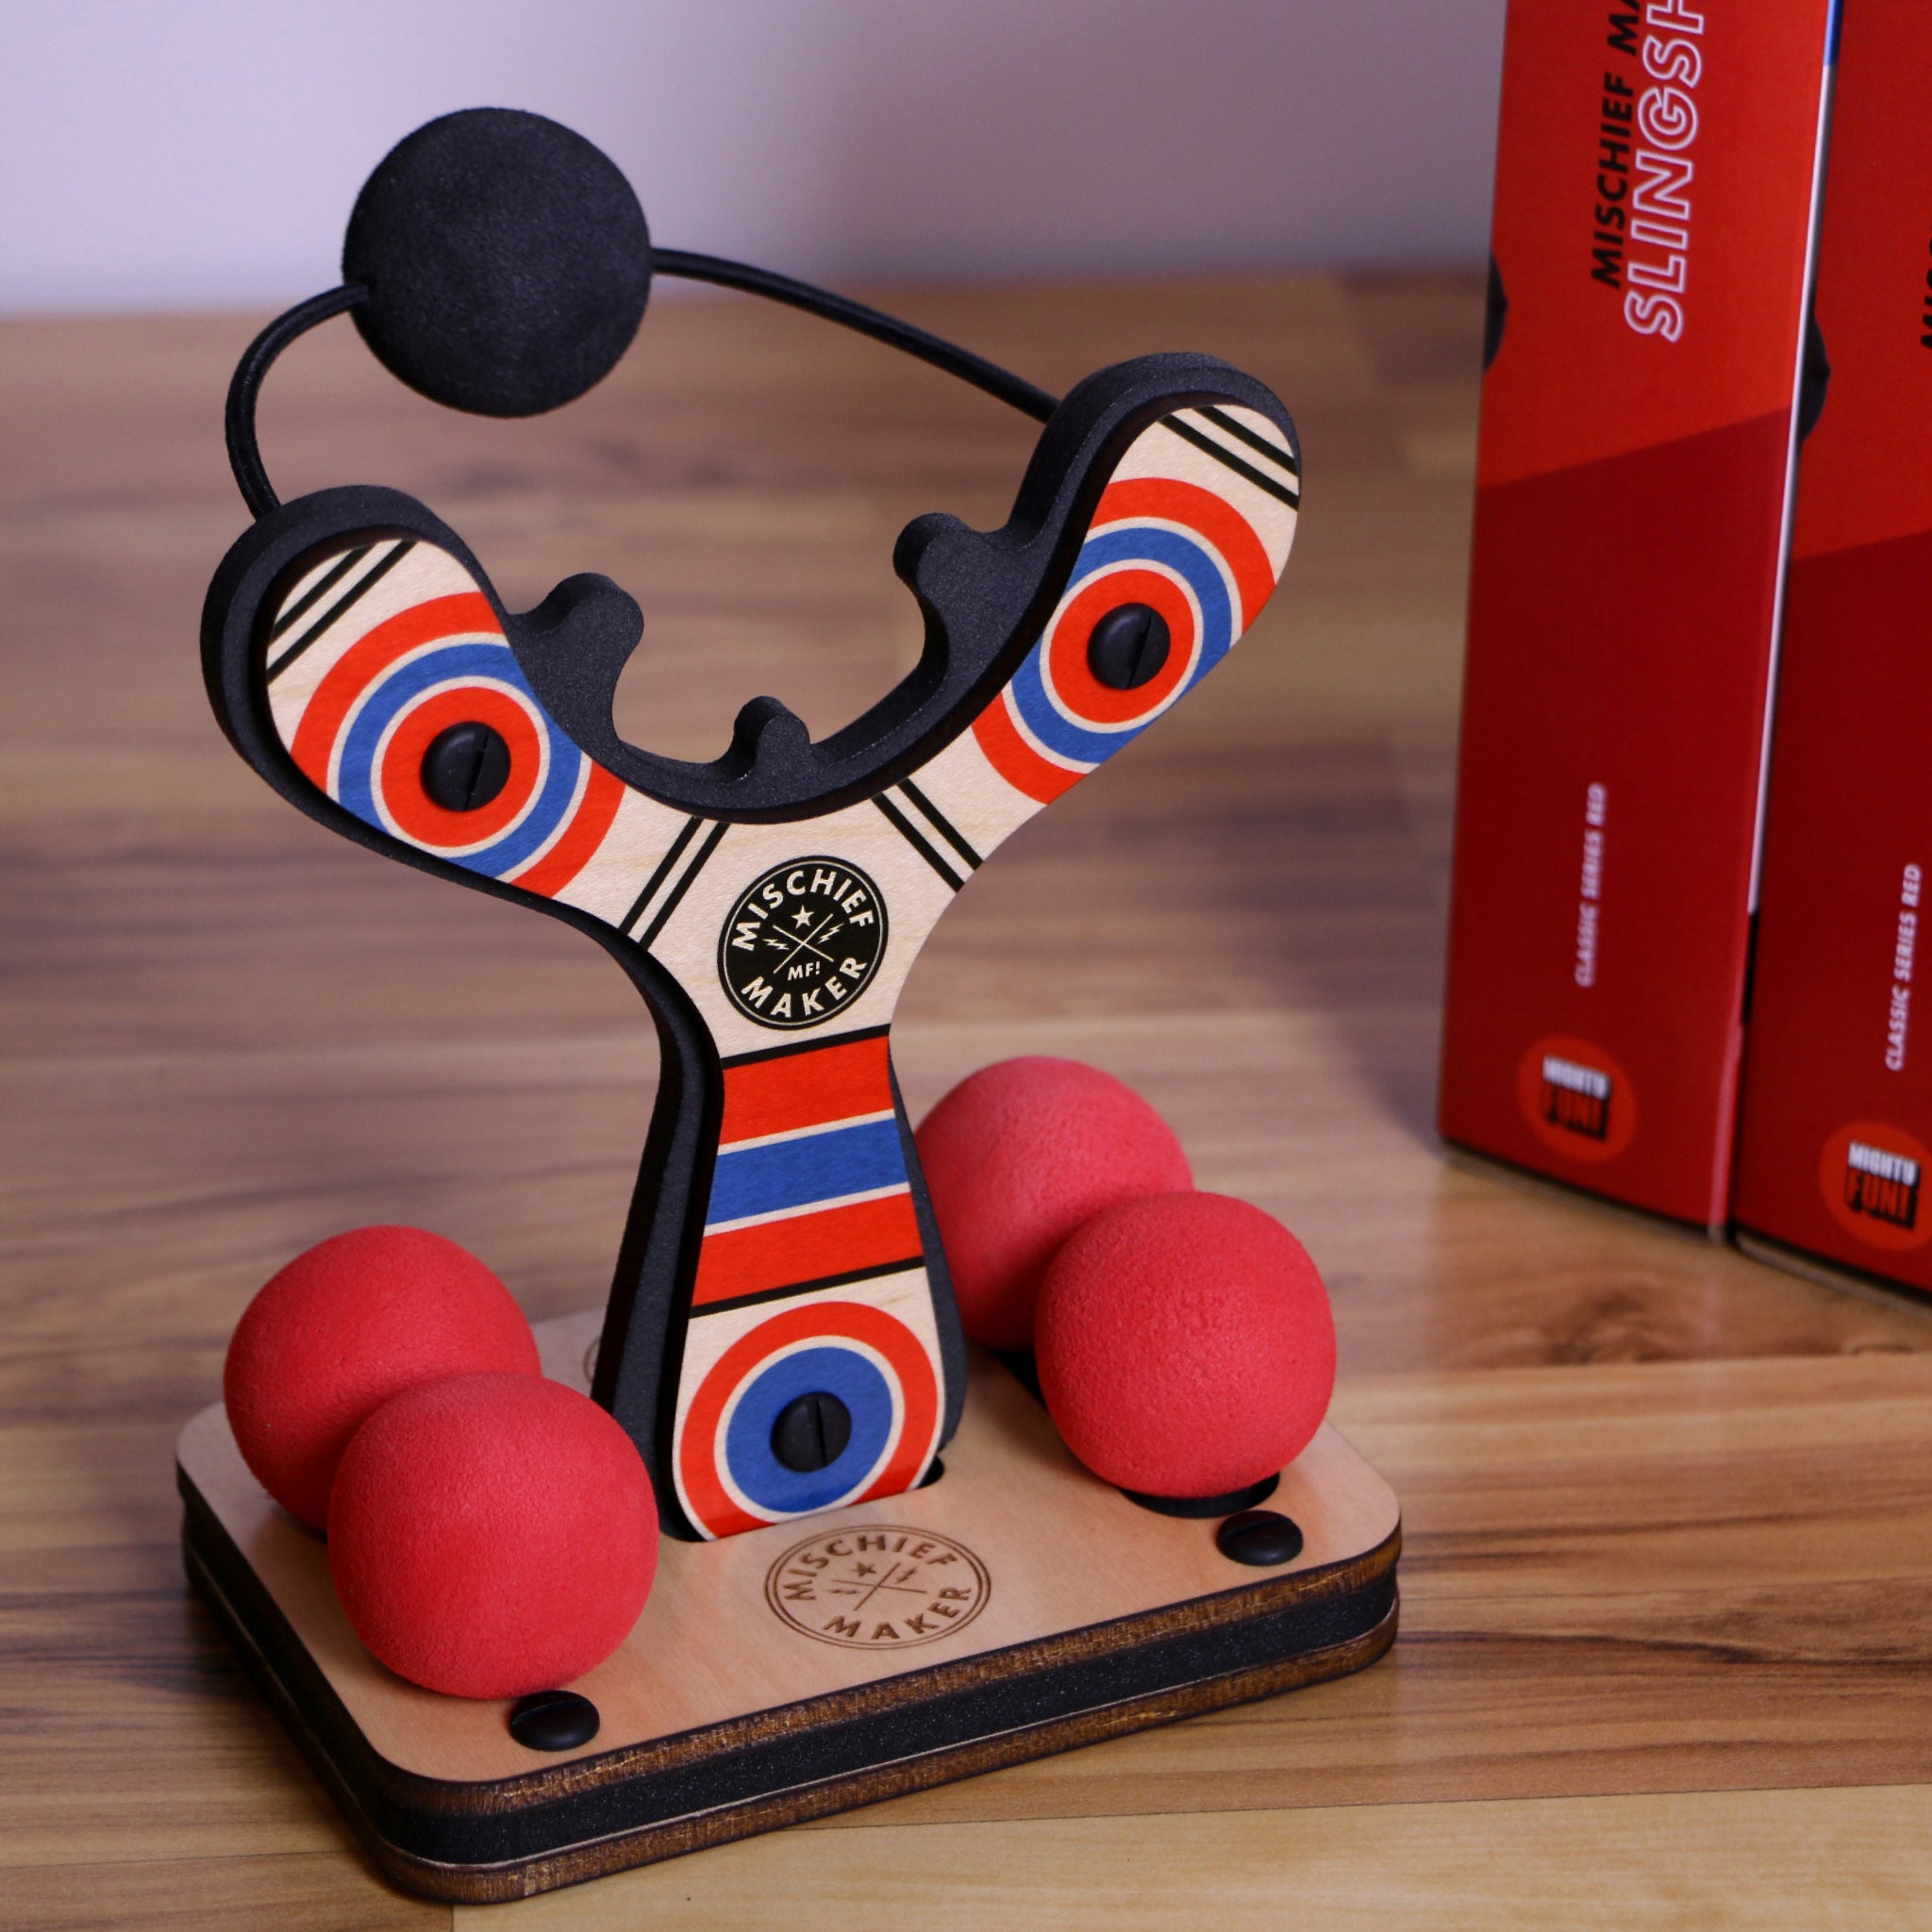 Red Classic wood slingshot with 4 soft foam balls in display stand. Mischief Maker by Mighty Fun!